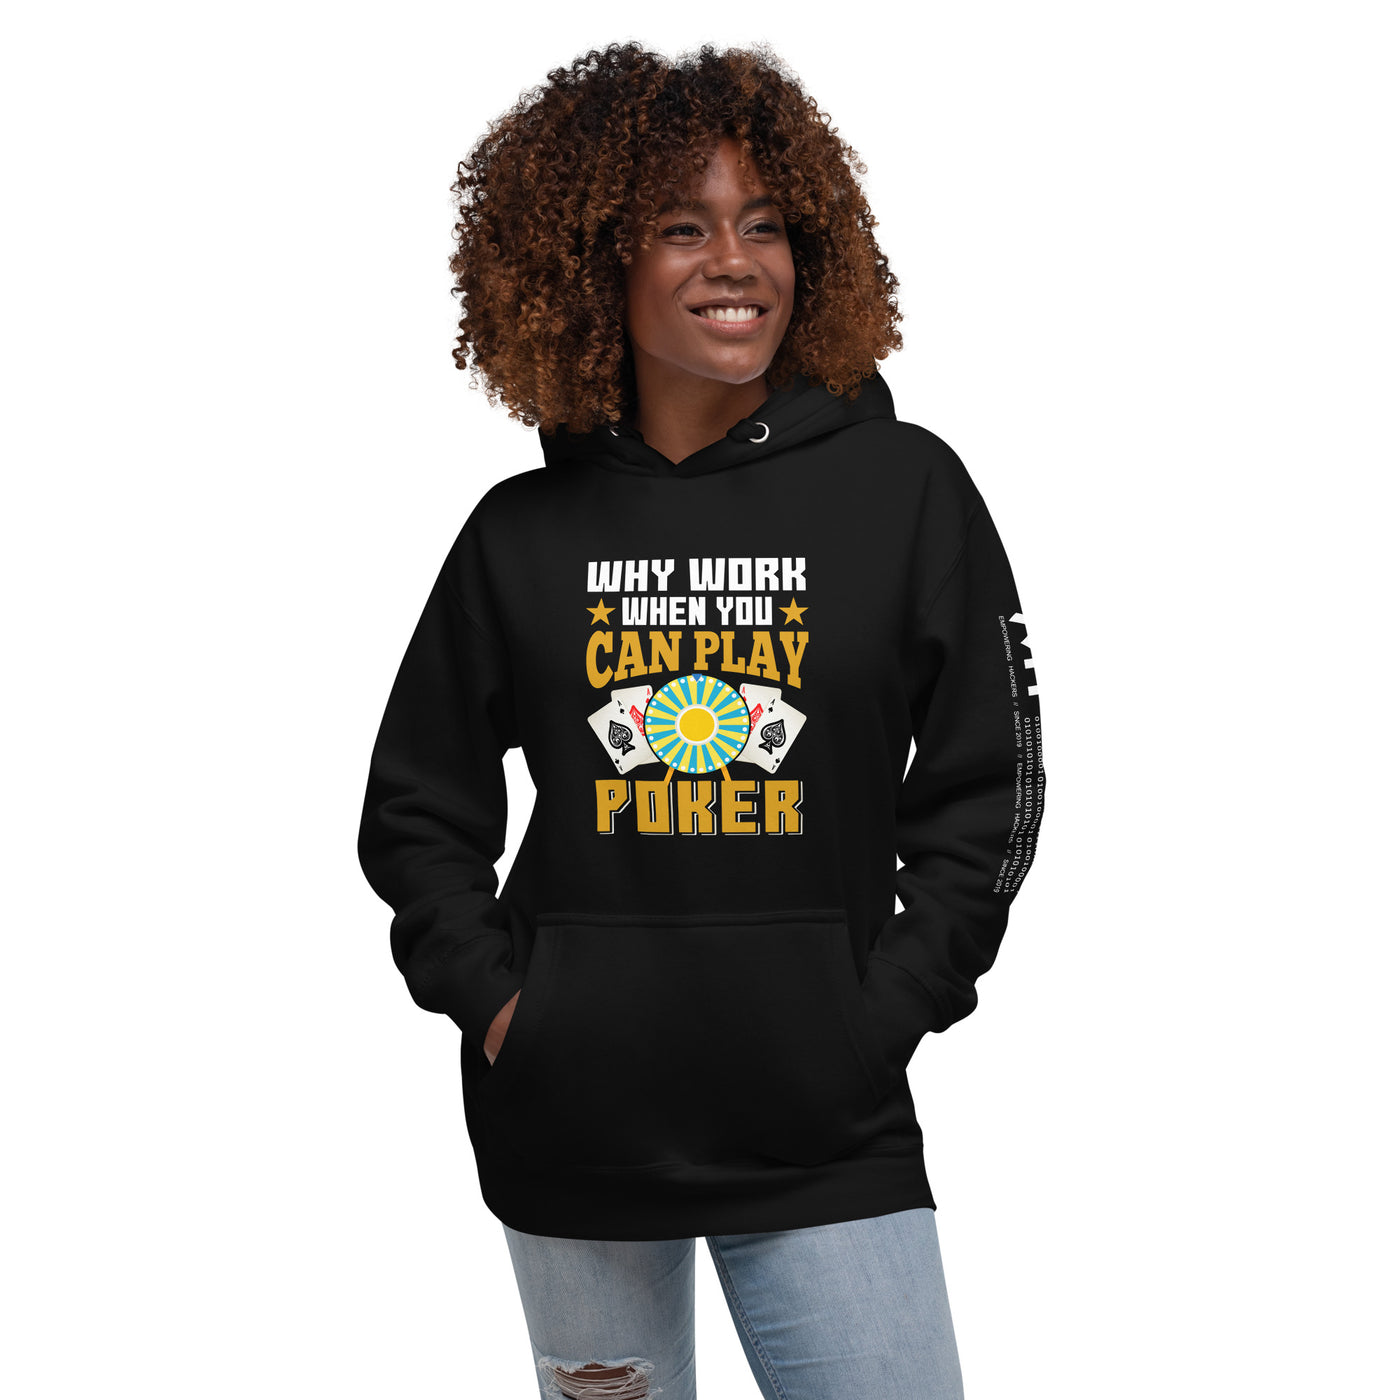 Why Work when you can Play Poker - Unisex Hoodie